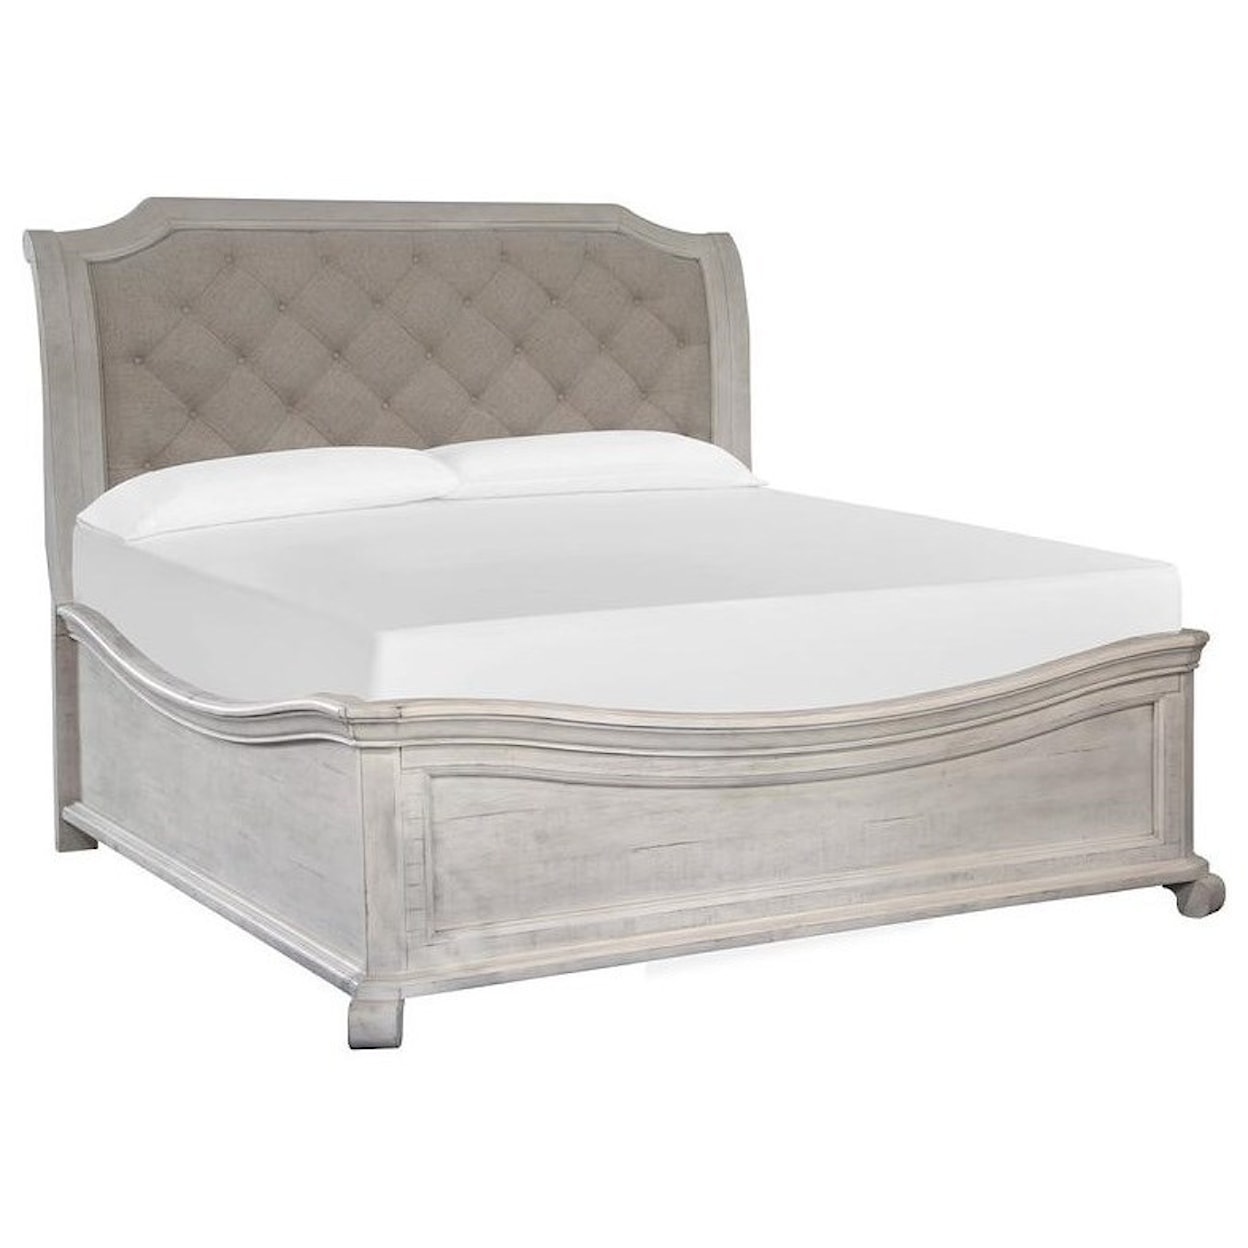 Magnussen Home Bronwyn Bedroom Cali King Sleigh Bed with Shaped Footboard